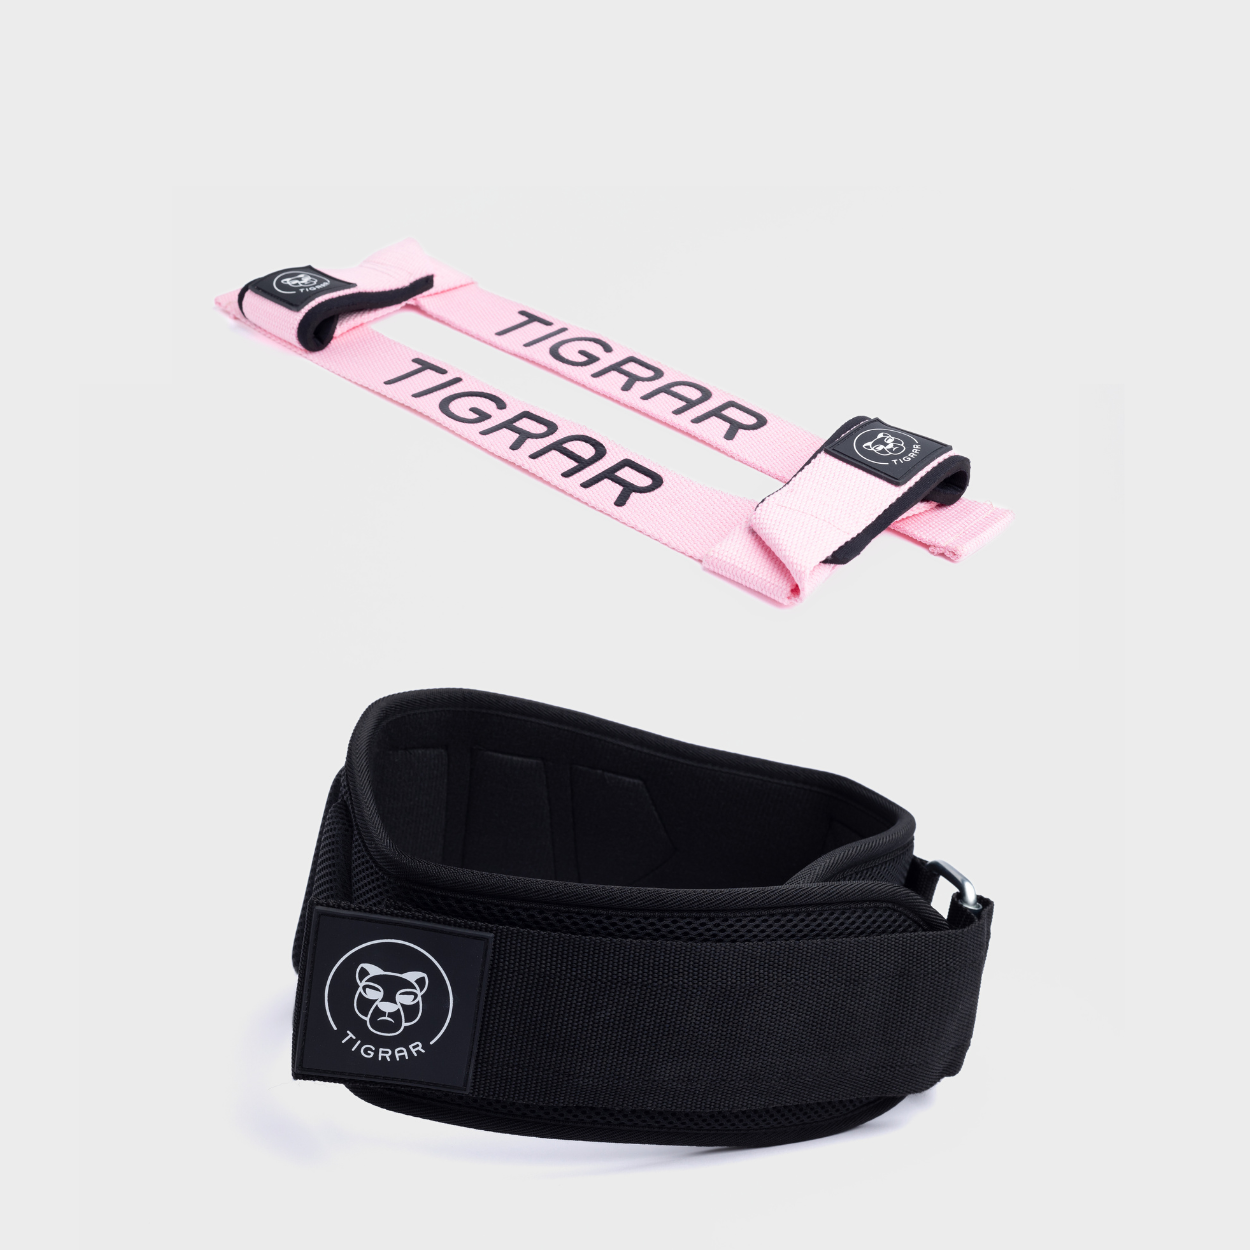 Fitness riem met pink weight lifting straps